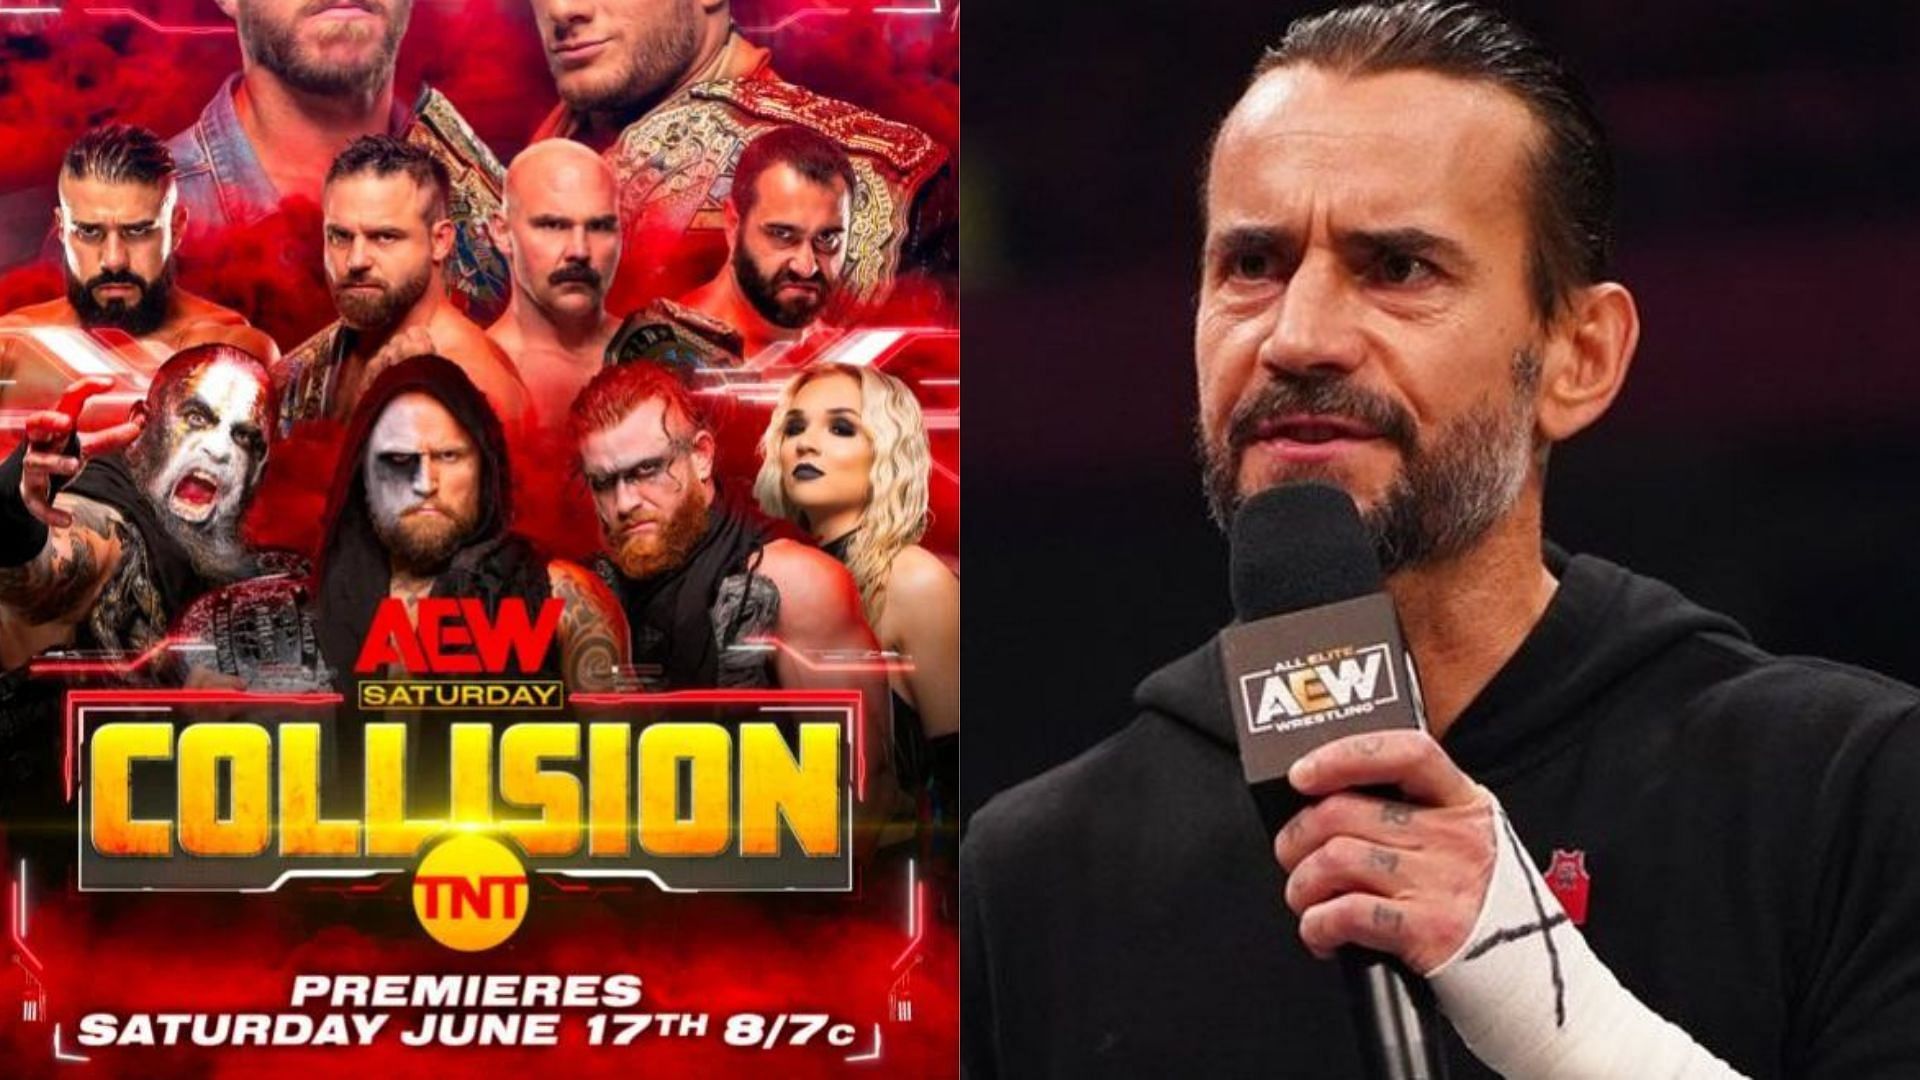 AEW Collision is set to debut on 17th June